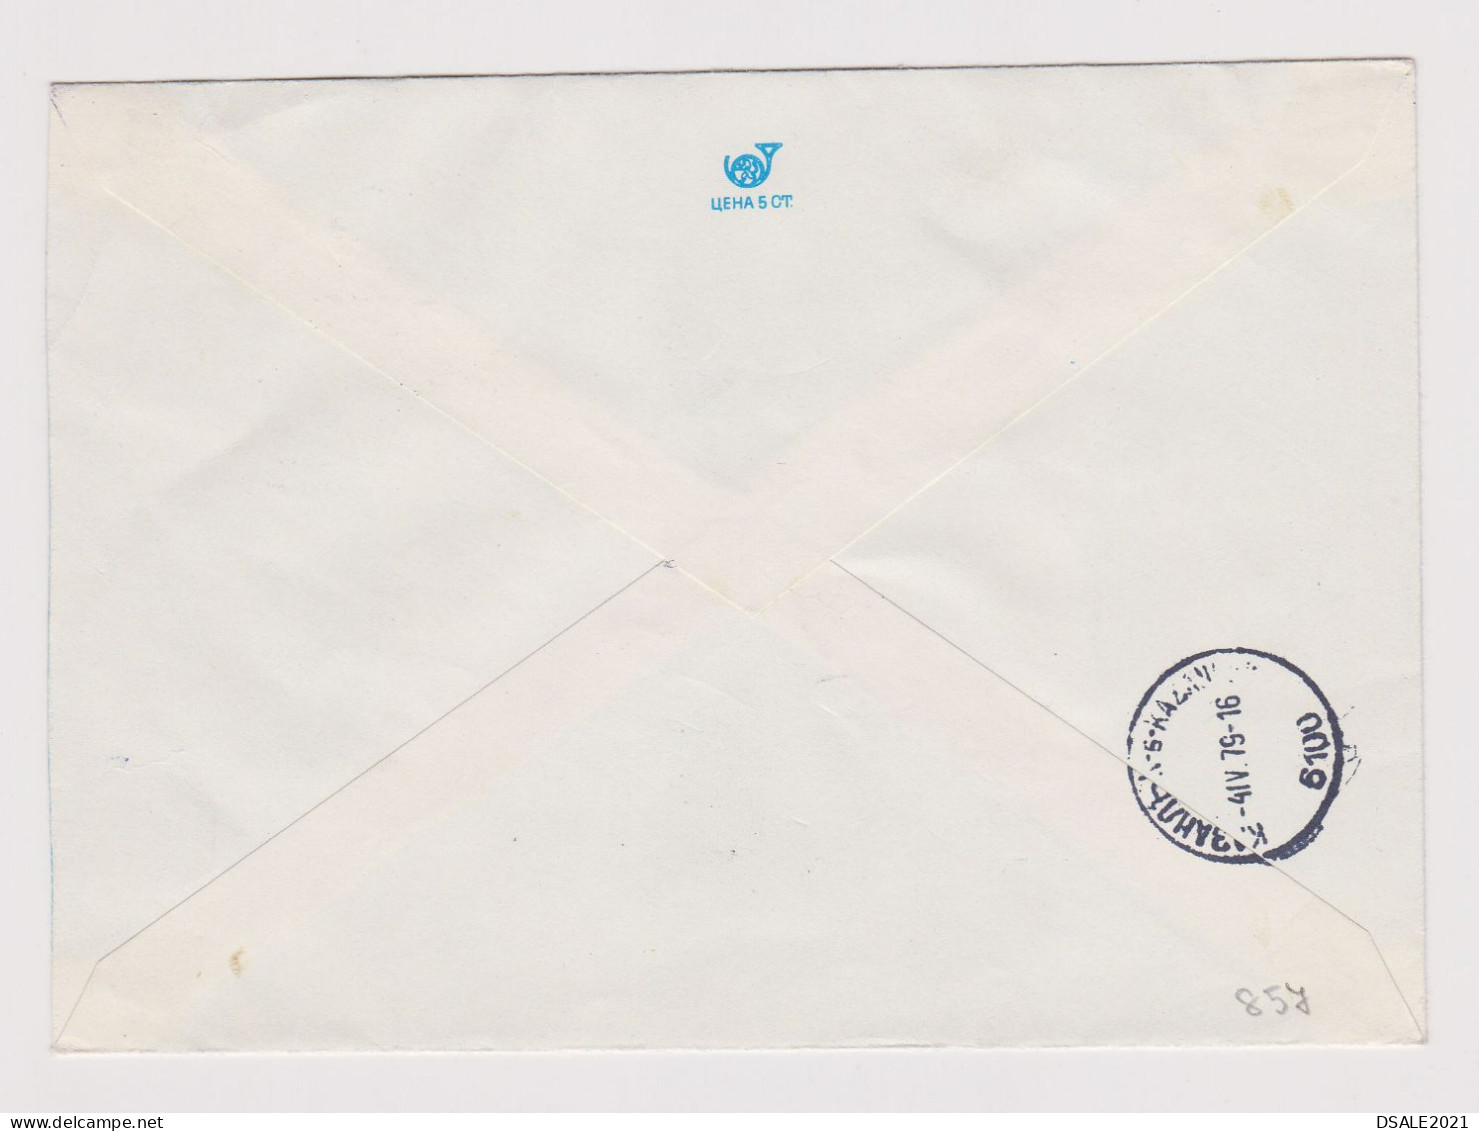 Bulgaria Bulgarien 1979 Ganzsachen R-Brief, Postal Stationery Cover, Registered W/Topic Stamps Flower, Architecture /857 - Sobres